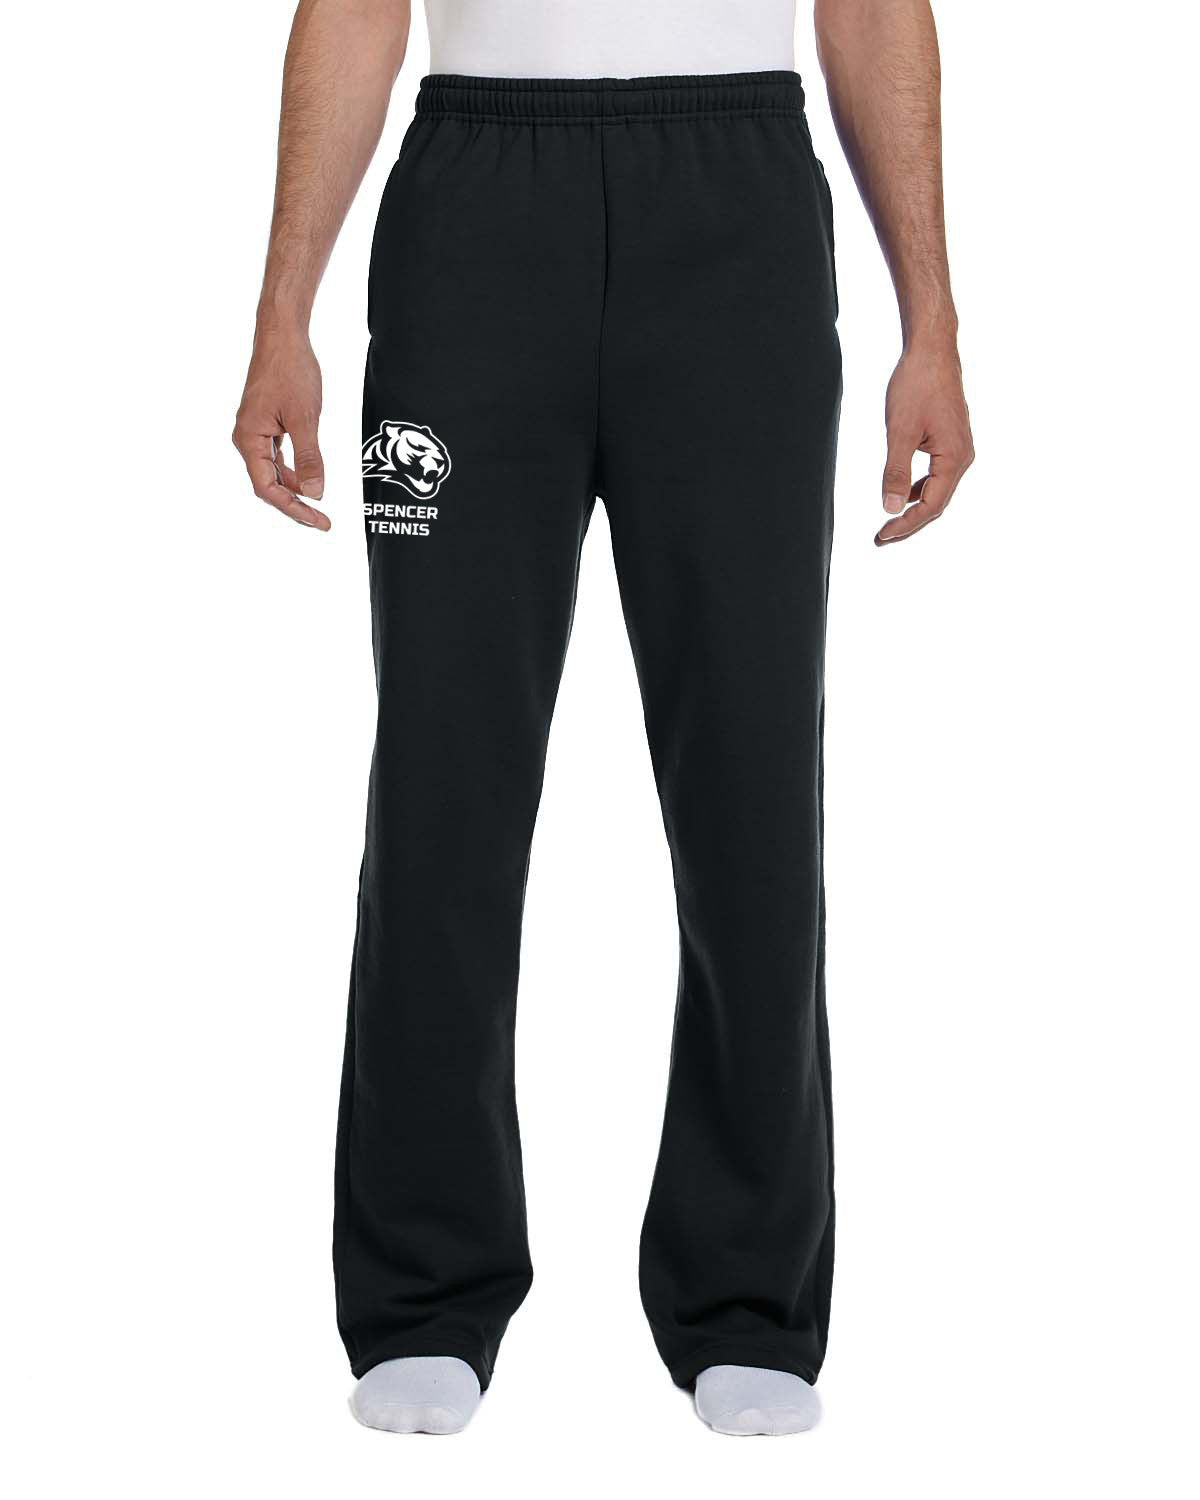 Adult Open Bottom Sweatpants with Pockets | Spencer Tennis